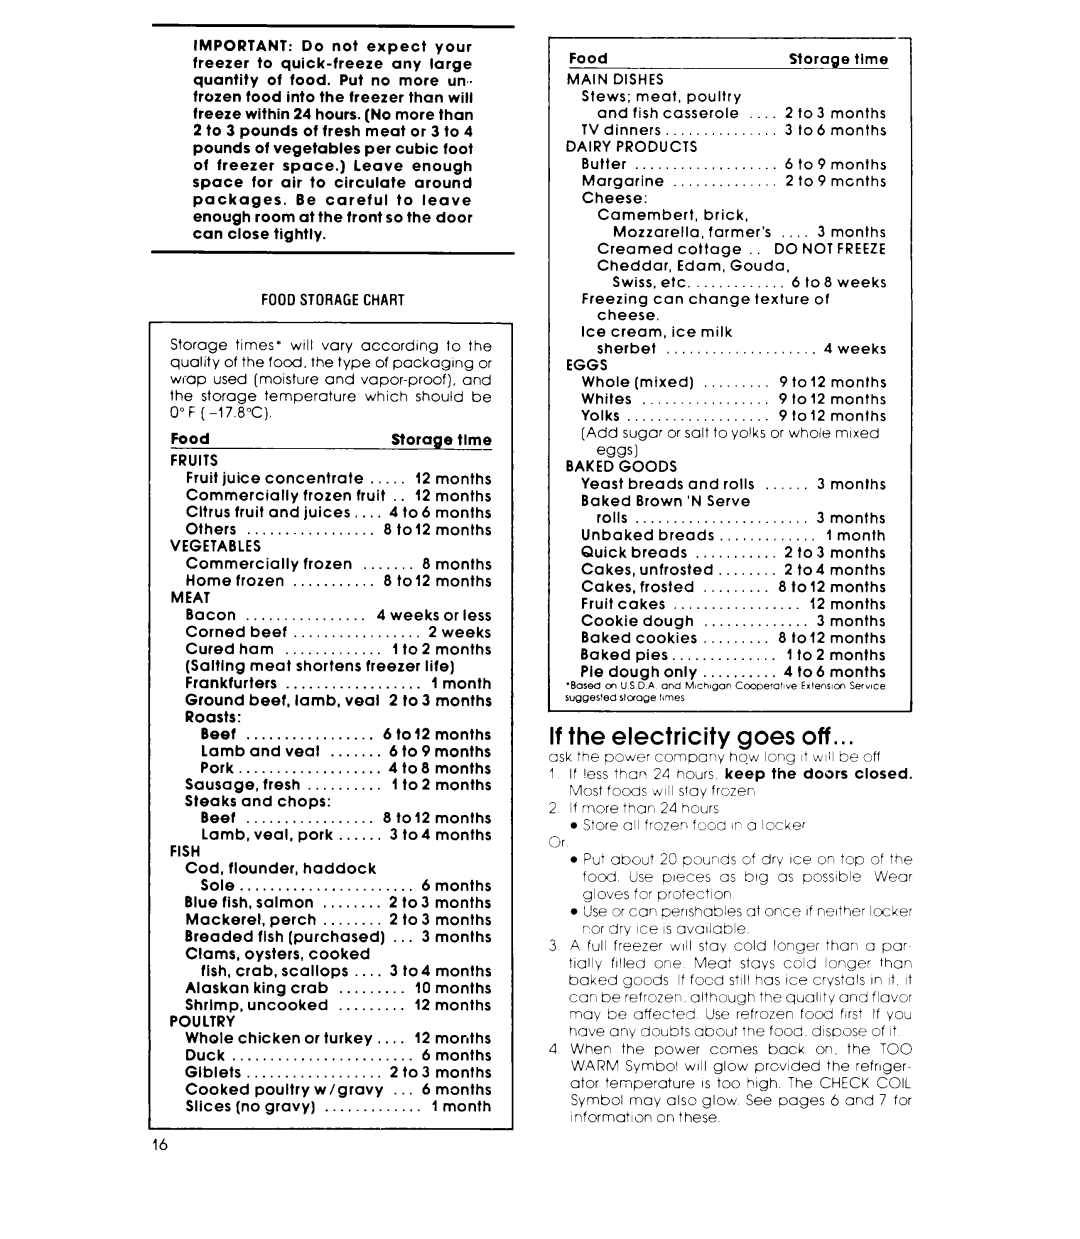 Whirlpool ED26SS manual If the electricity goes off 